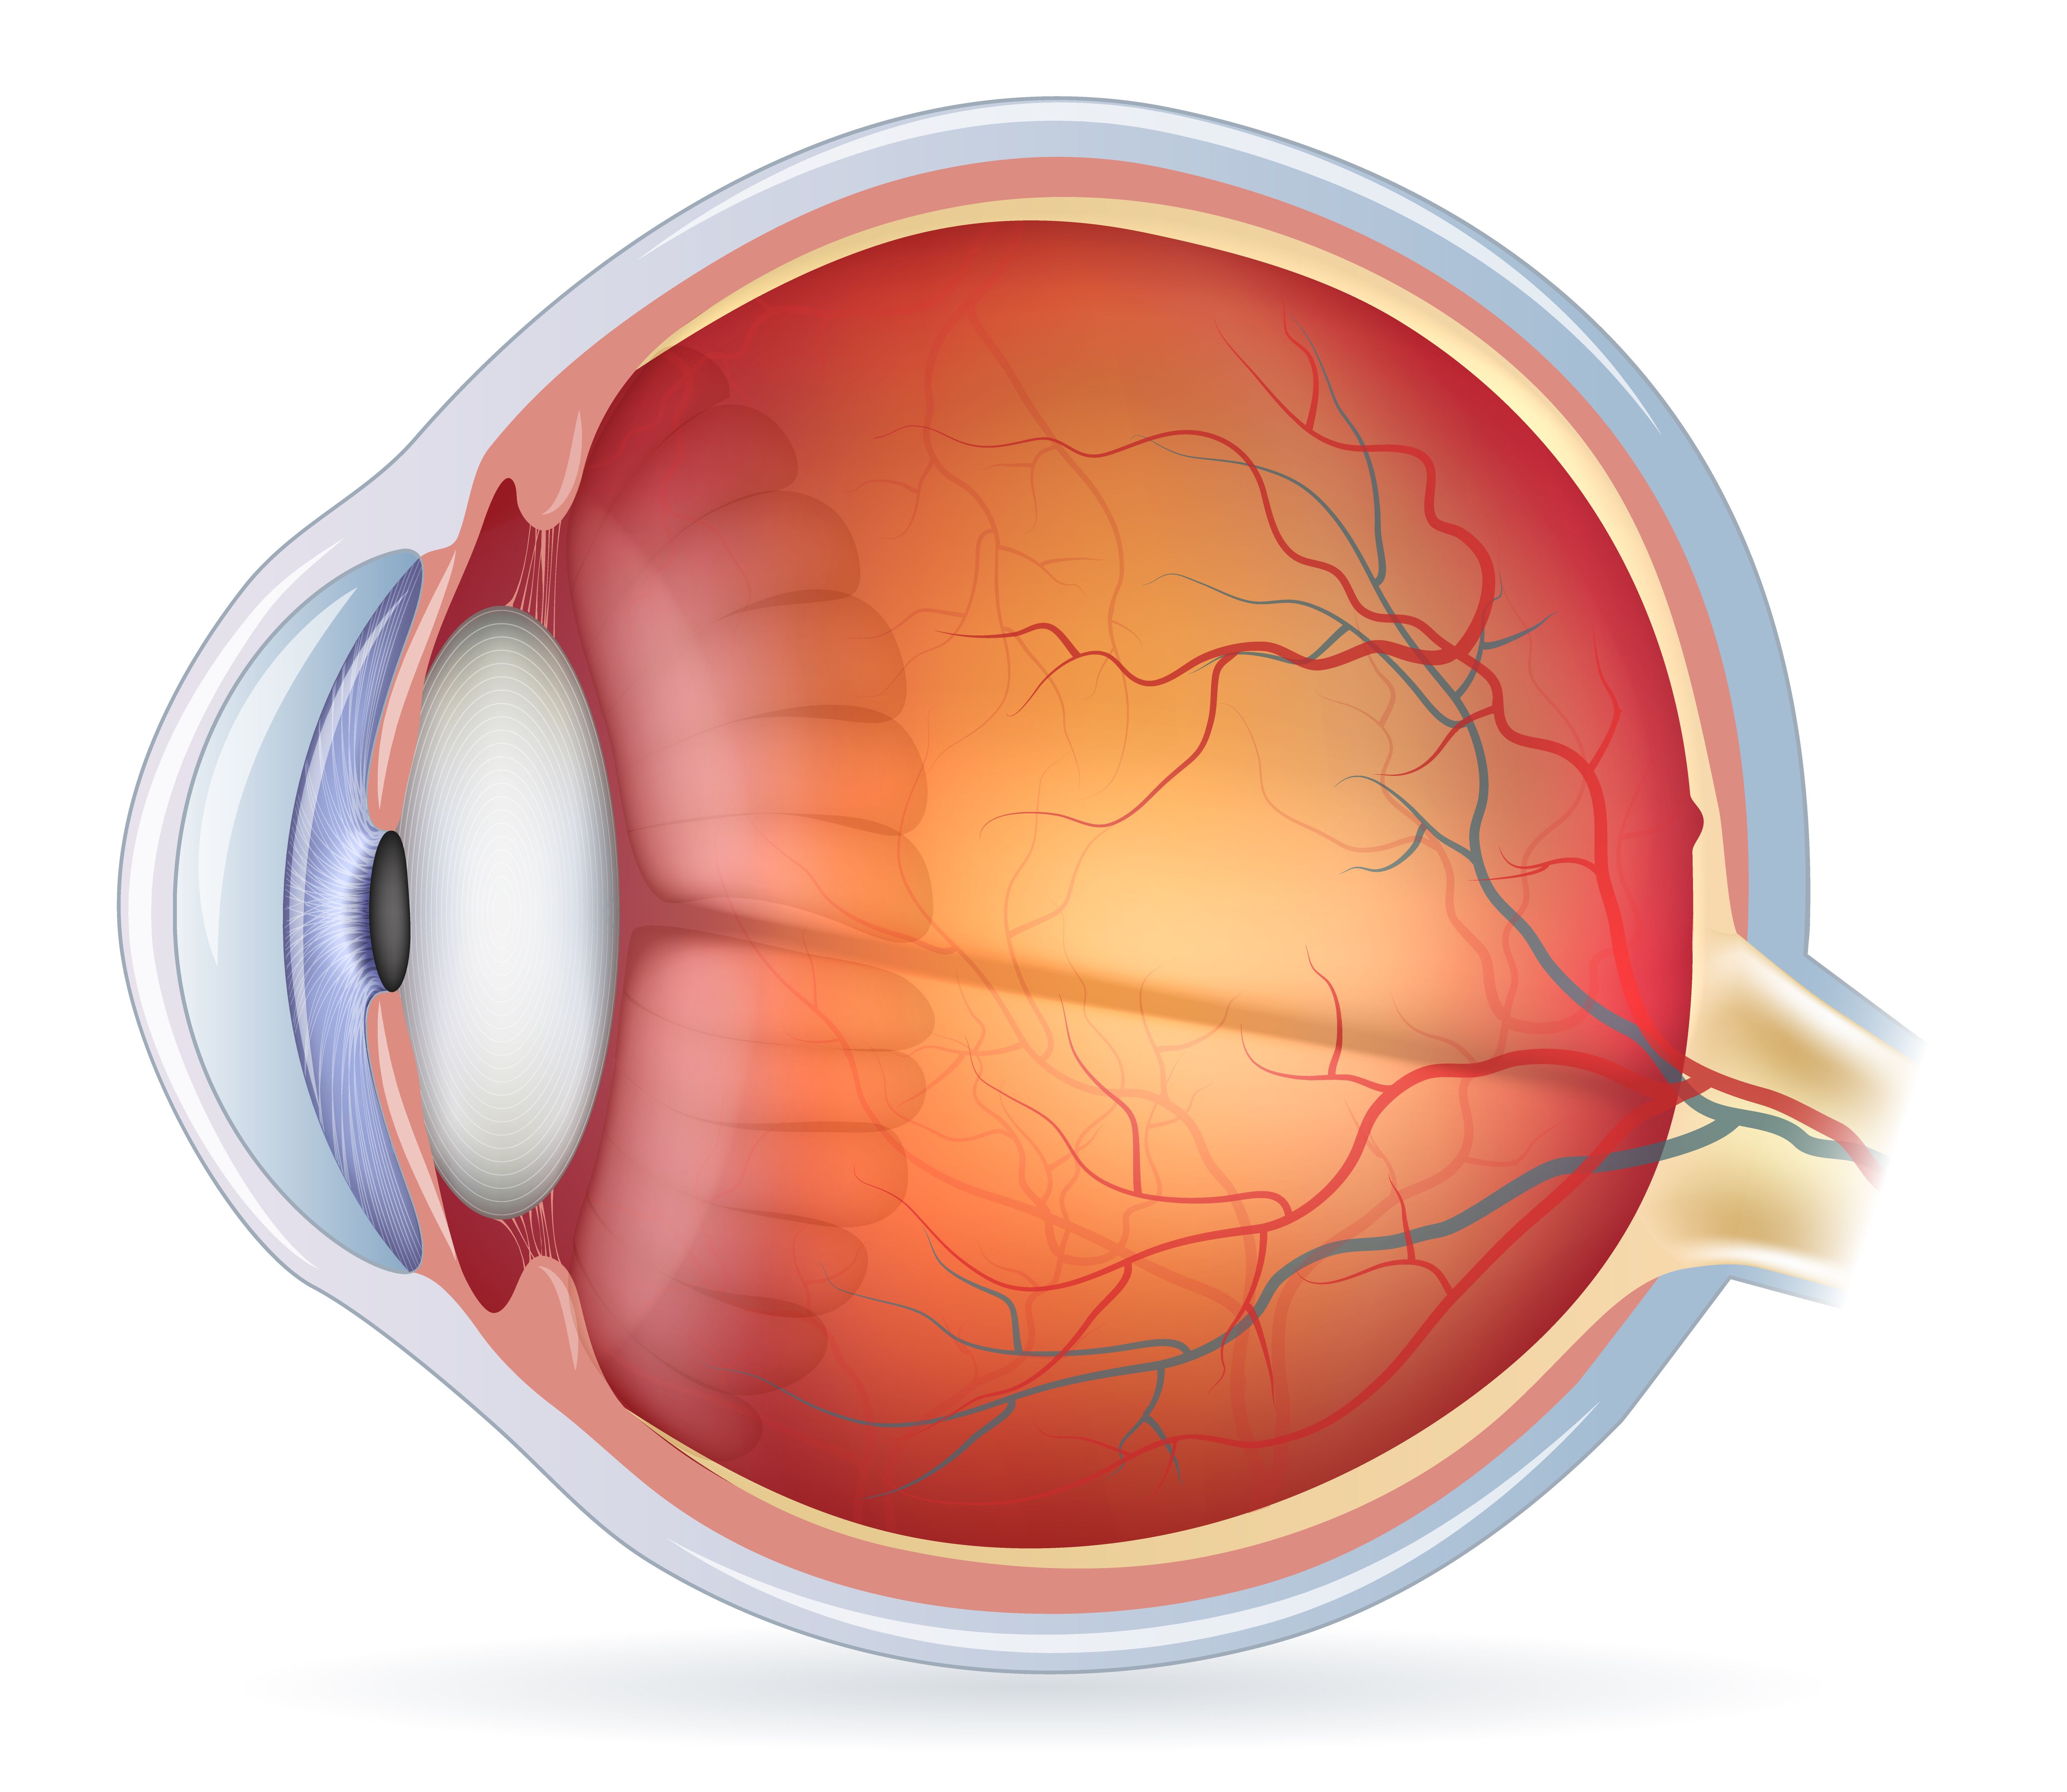 Why can’t I see up close anymore? Presbyopia and how it affects our vision.